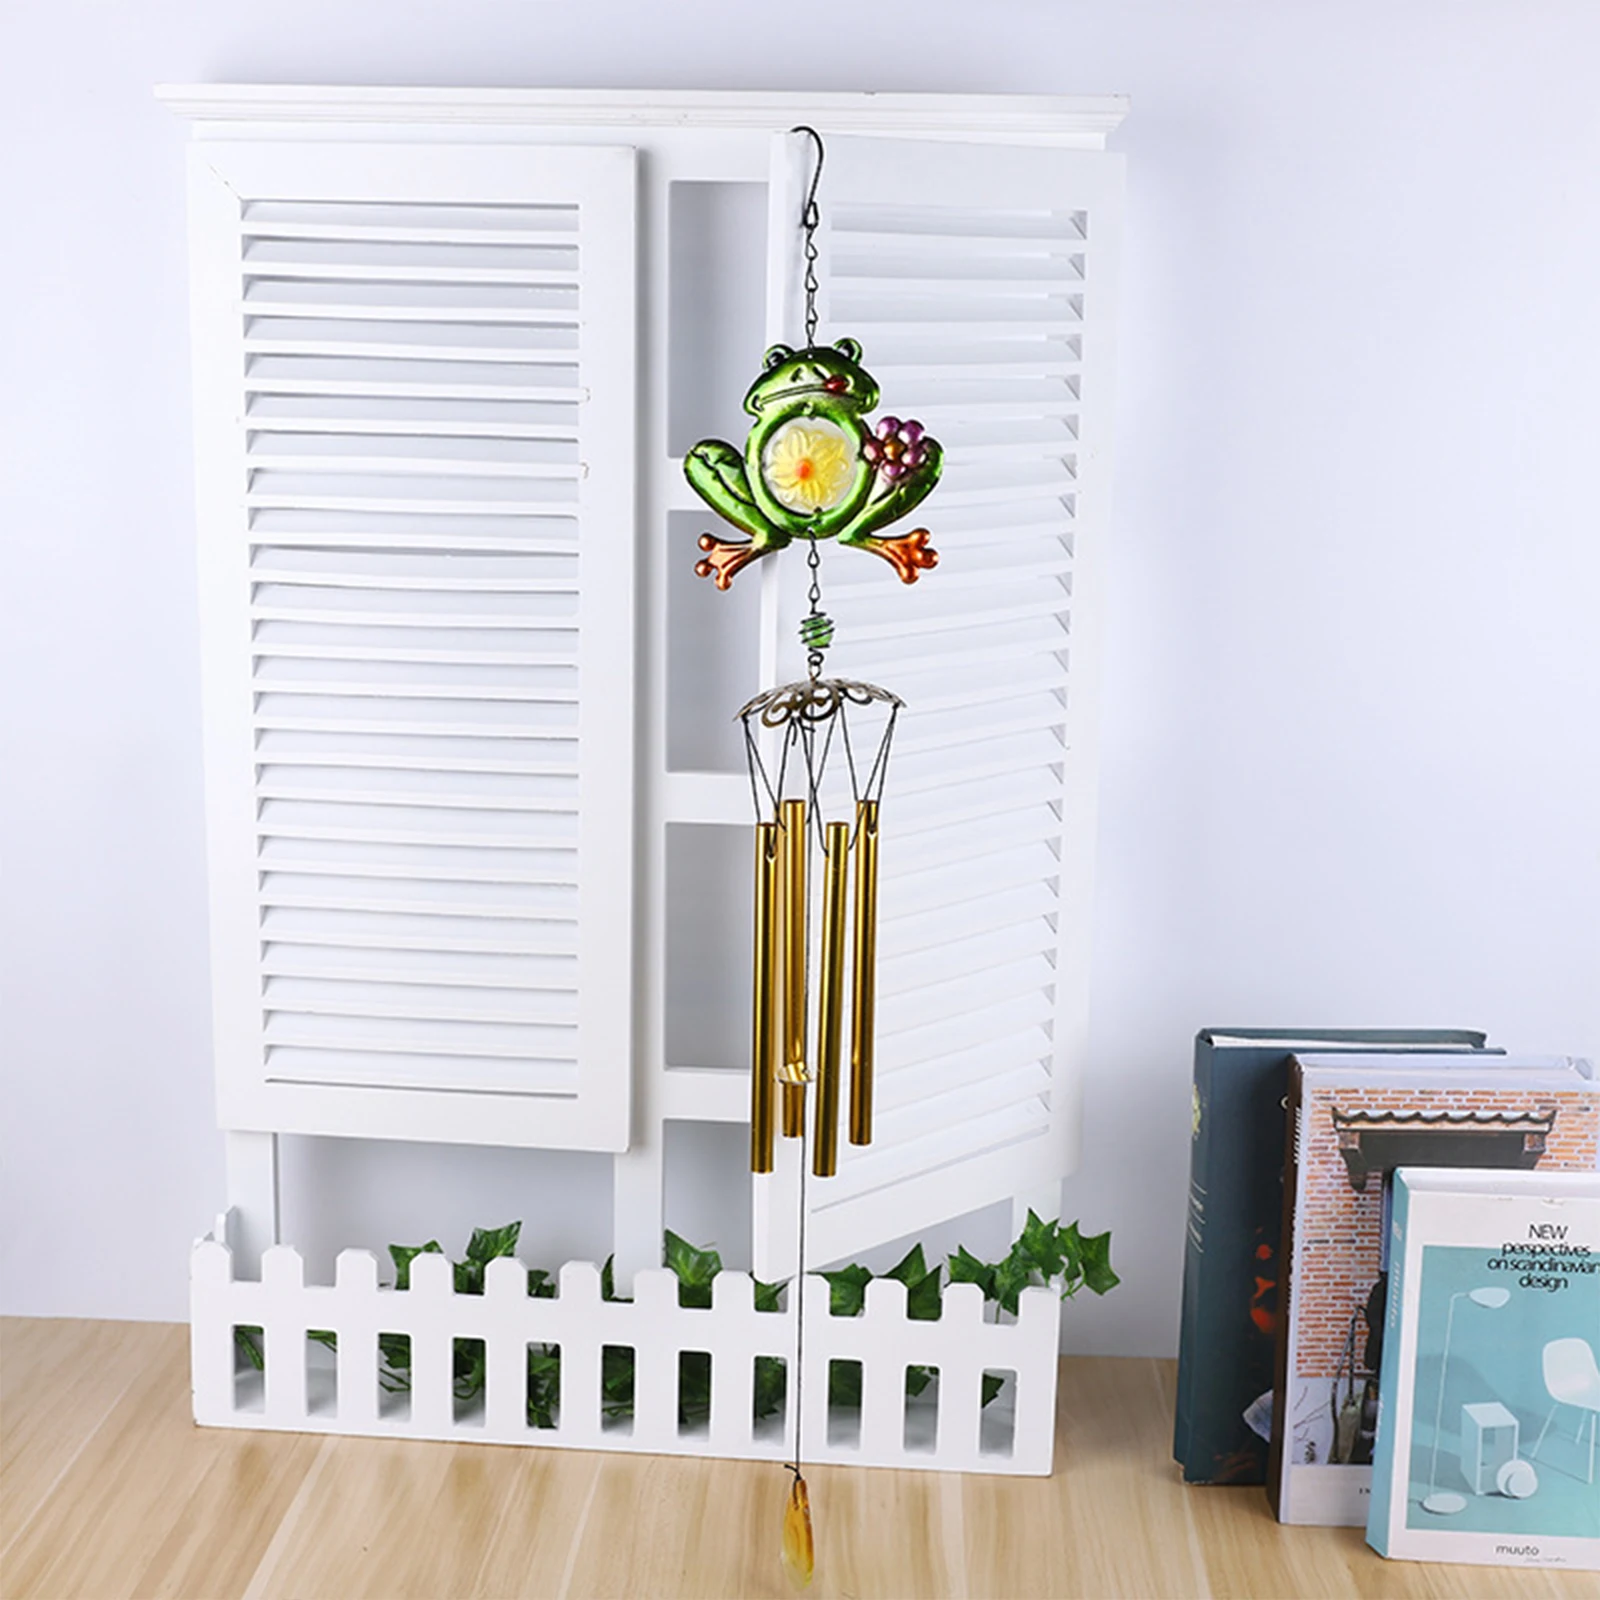 

Balcony Bell Wind Chimes Charm Metal Wrought Iron Green Garden Decoration Painted Ornaments